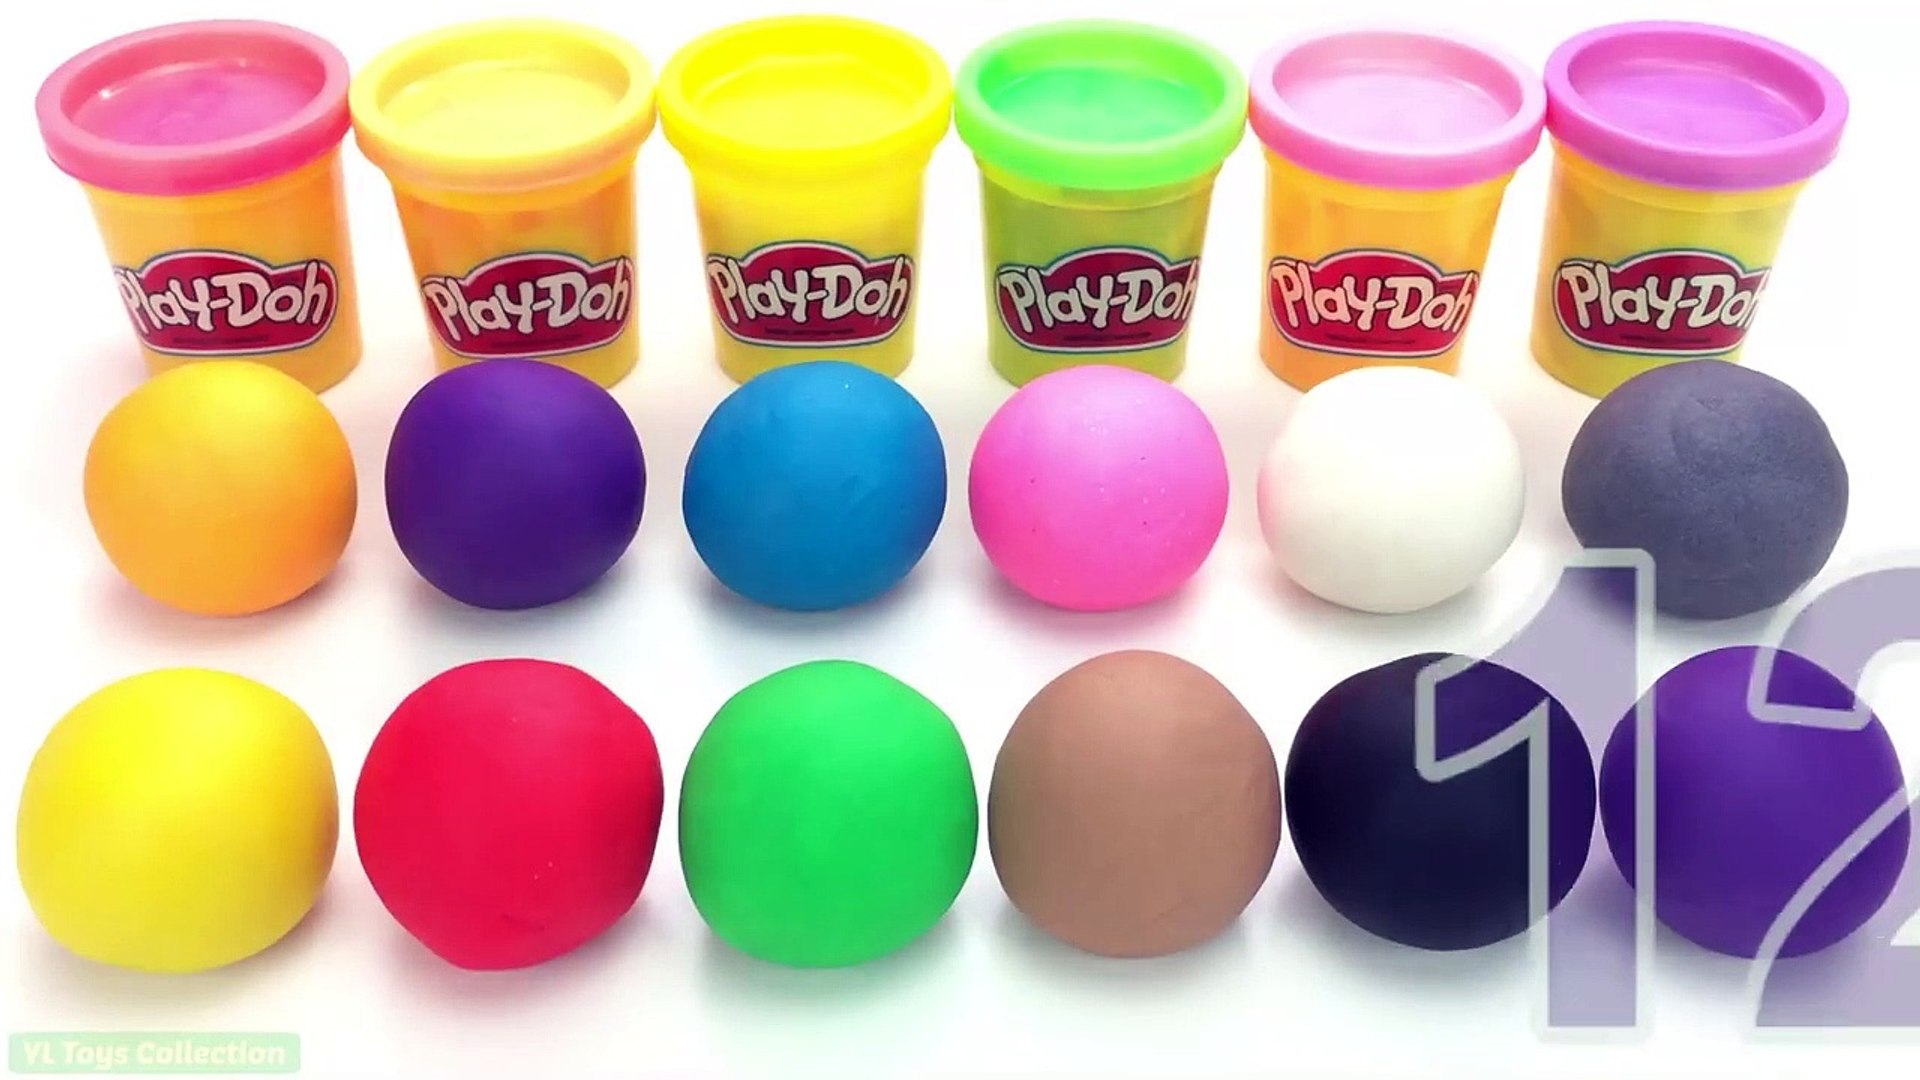 Learn Colors with Play Doh Balls and Cookie Molds Surprise Toys 